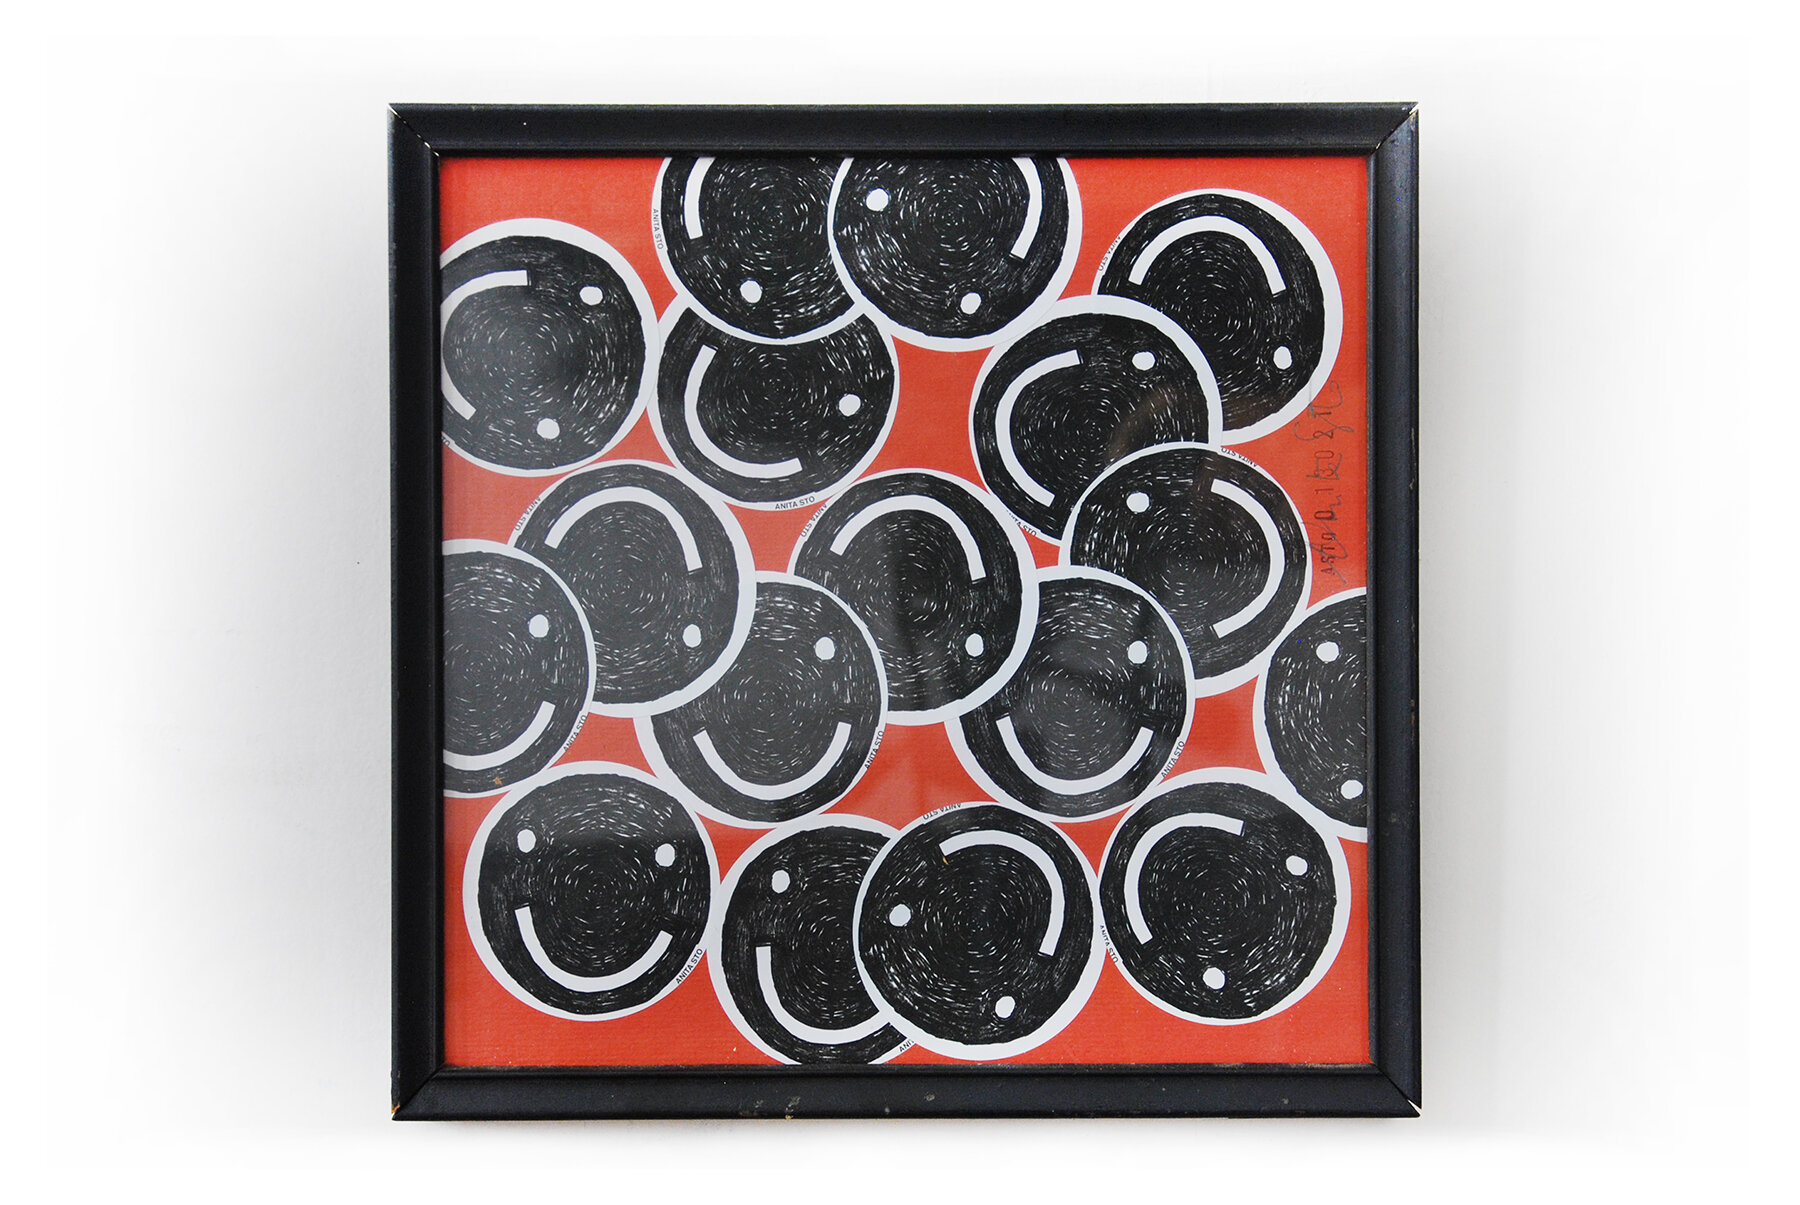   SMILING FACES 1  Vinyl Stickers on Paper Wood frame and Glass 10” x 10” 2020 